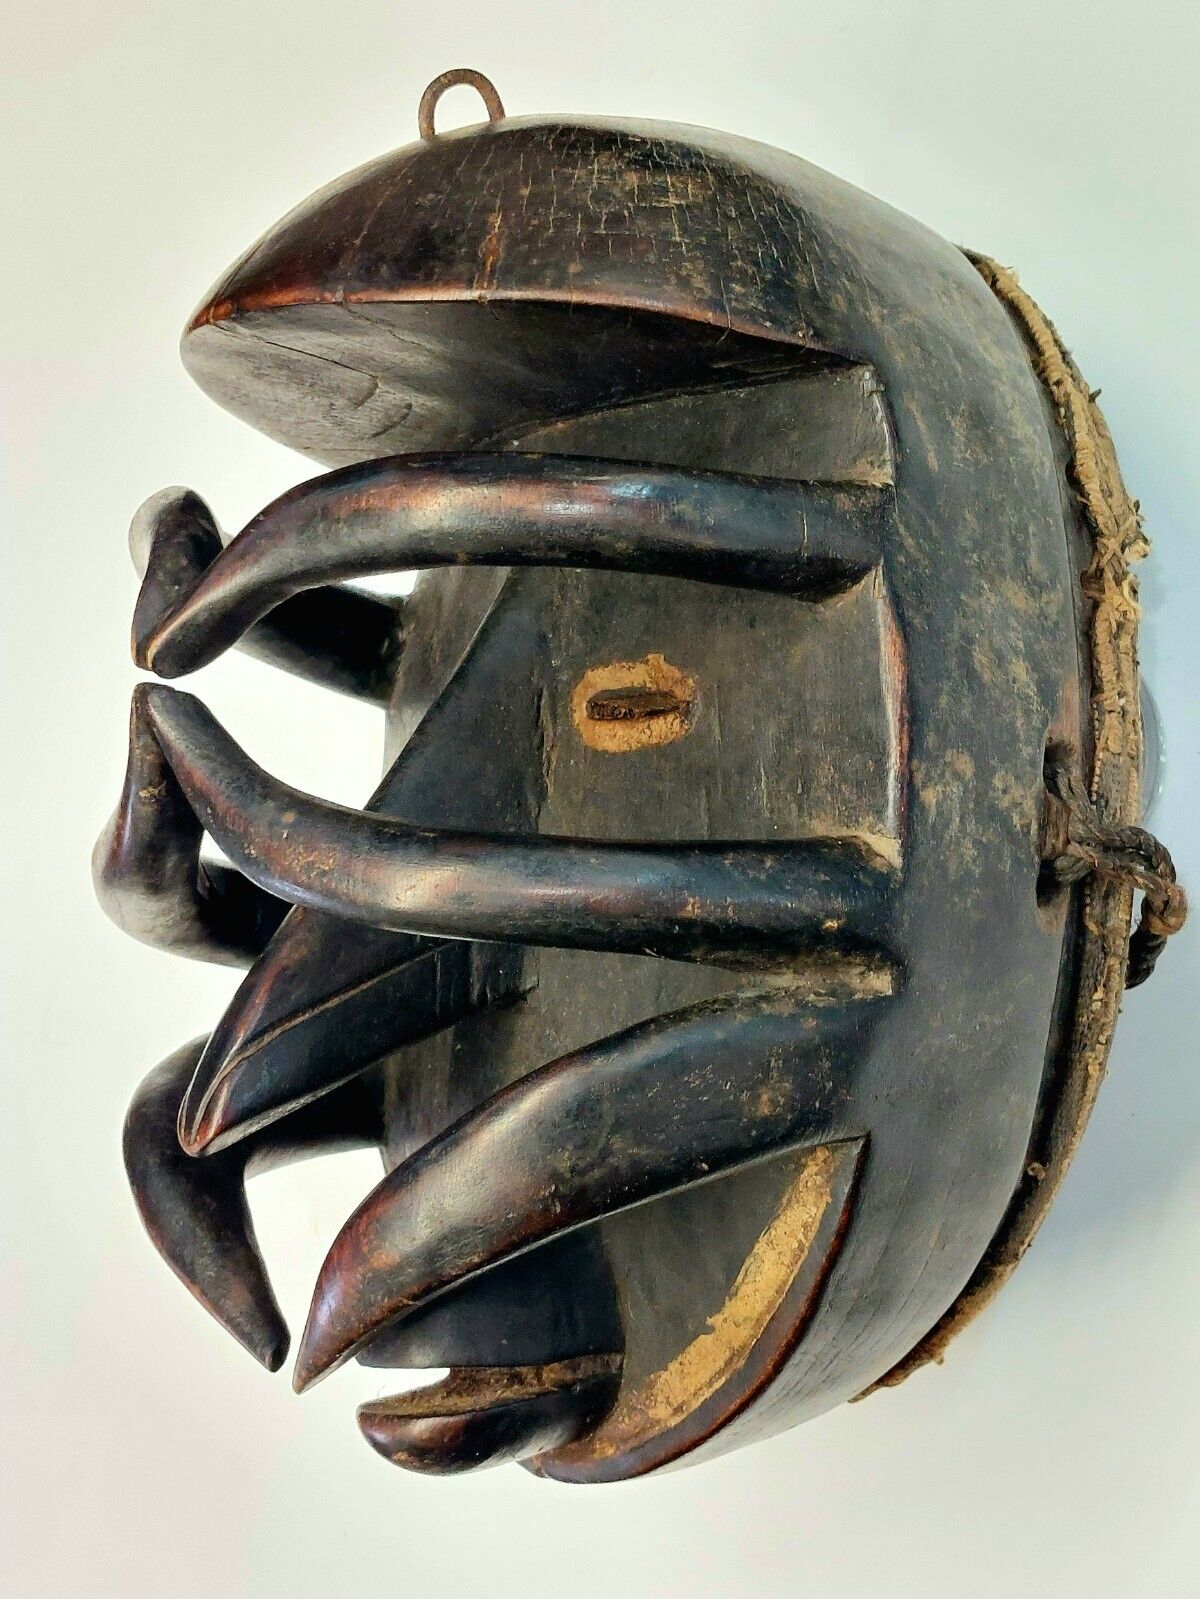 Rare Antique / Vintage African Hand Carved Solid Wood Dancing Mask 10” x 7” x 6